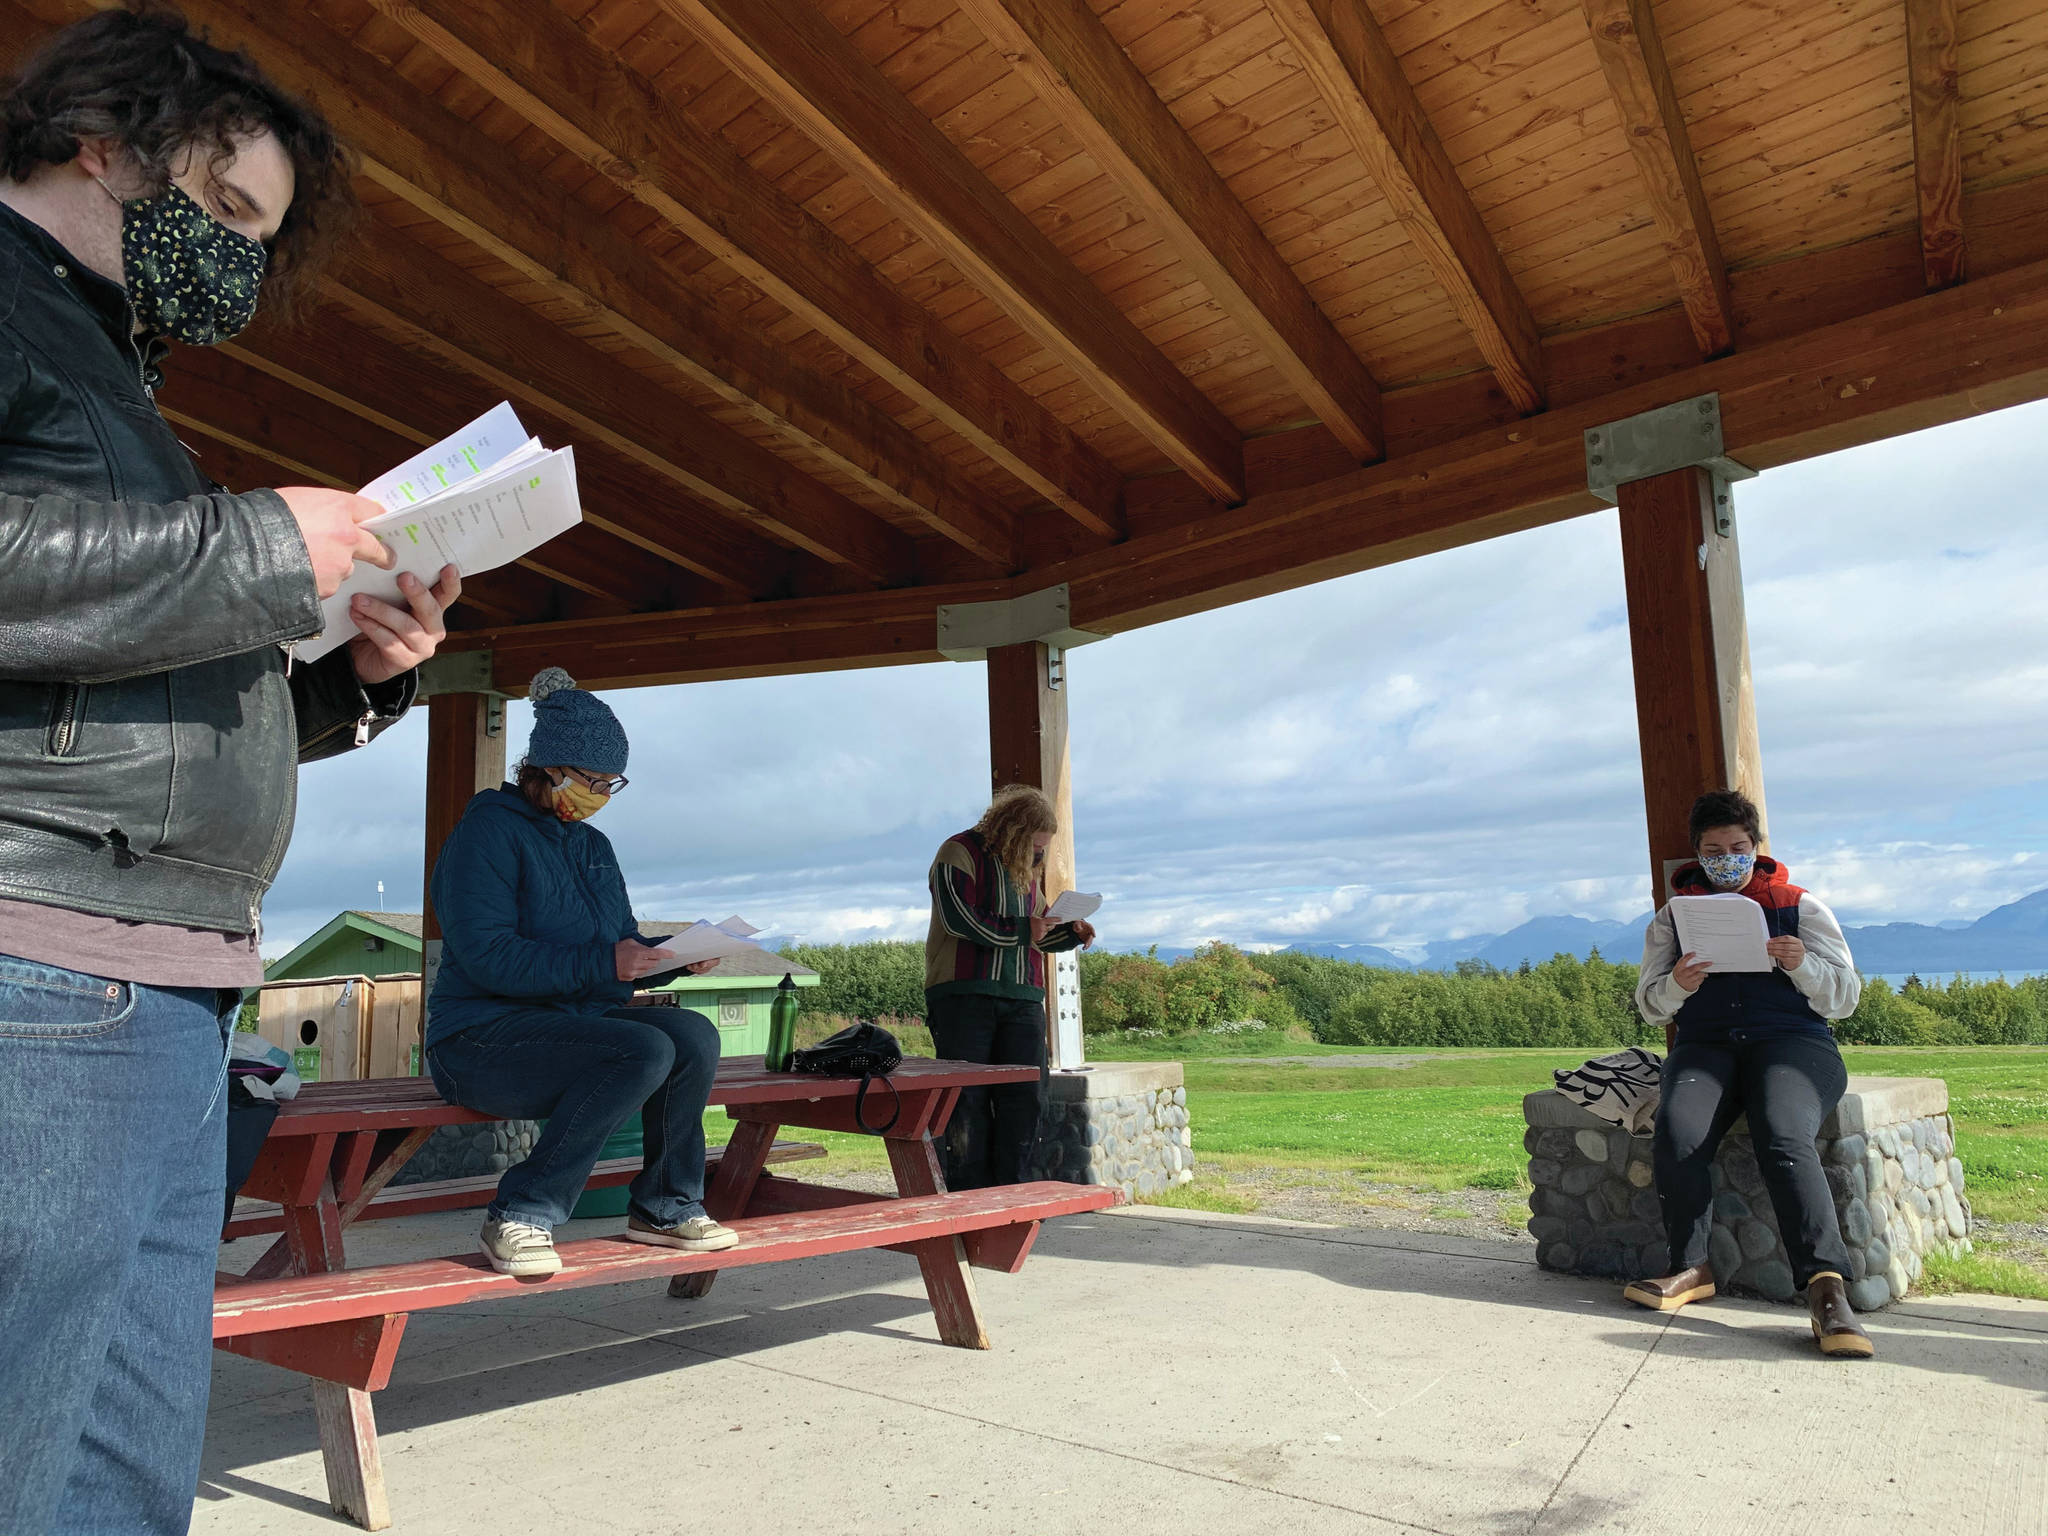 Some of the cast of “Knife Skills” rehearse at Karen Hornaday Park in August in Homer, Alaska. From left to right are Peter Sheppard, Ingrid Harrald, Theodore Castellani and Chloë Pleznac. (Photo courtesy of Lindsey Schneider)